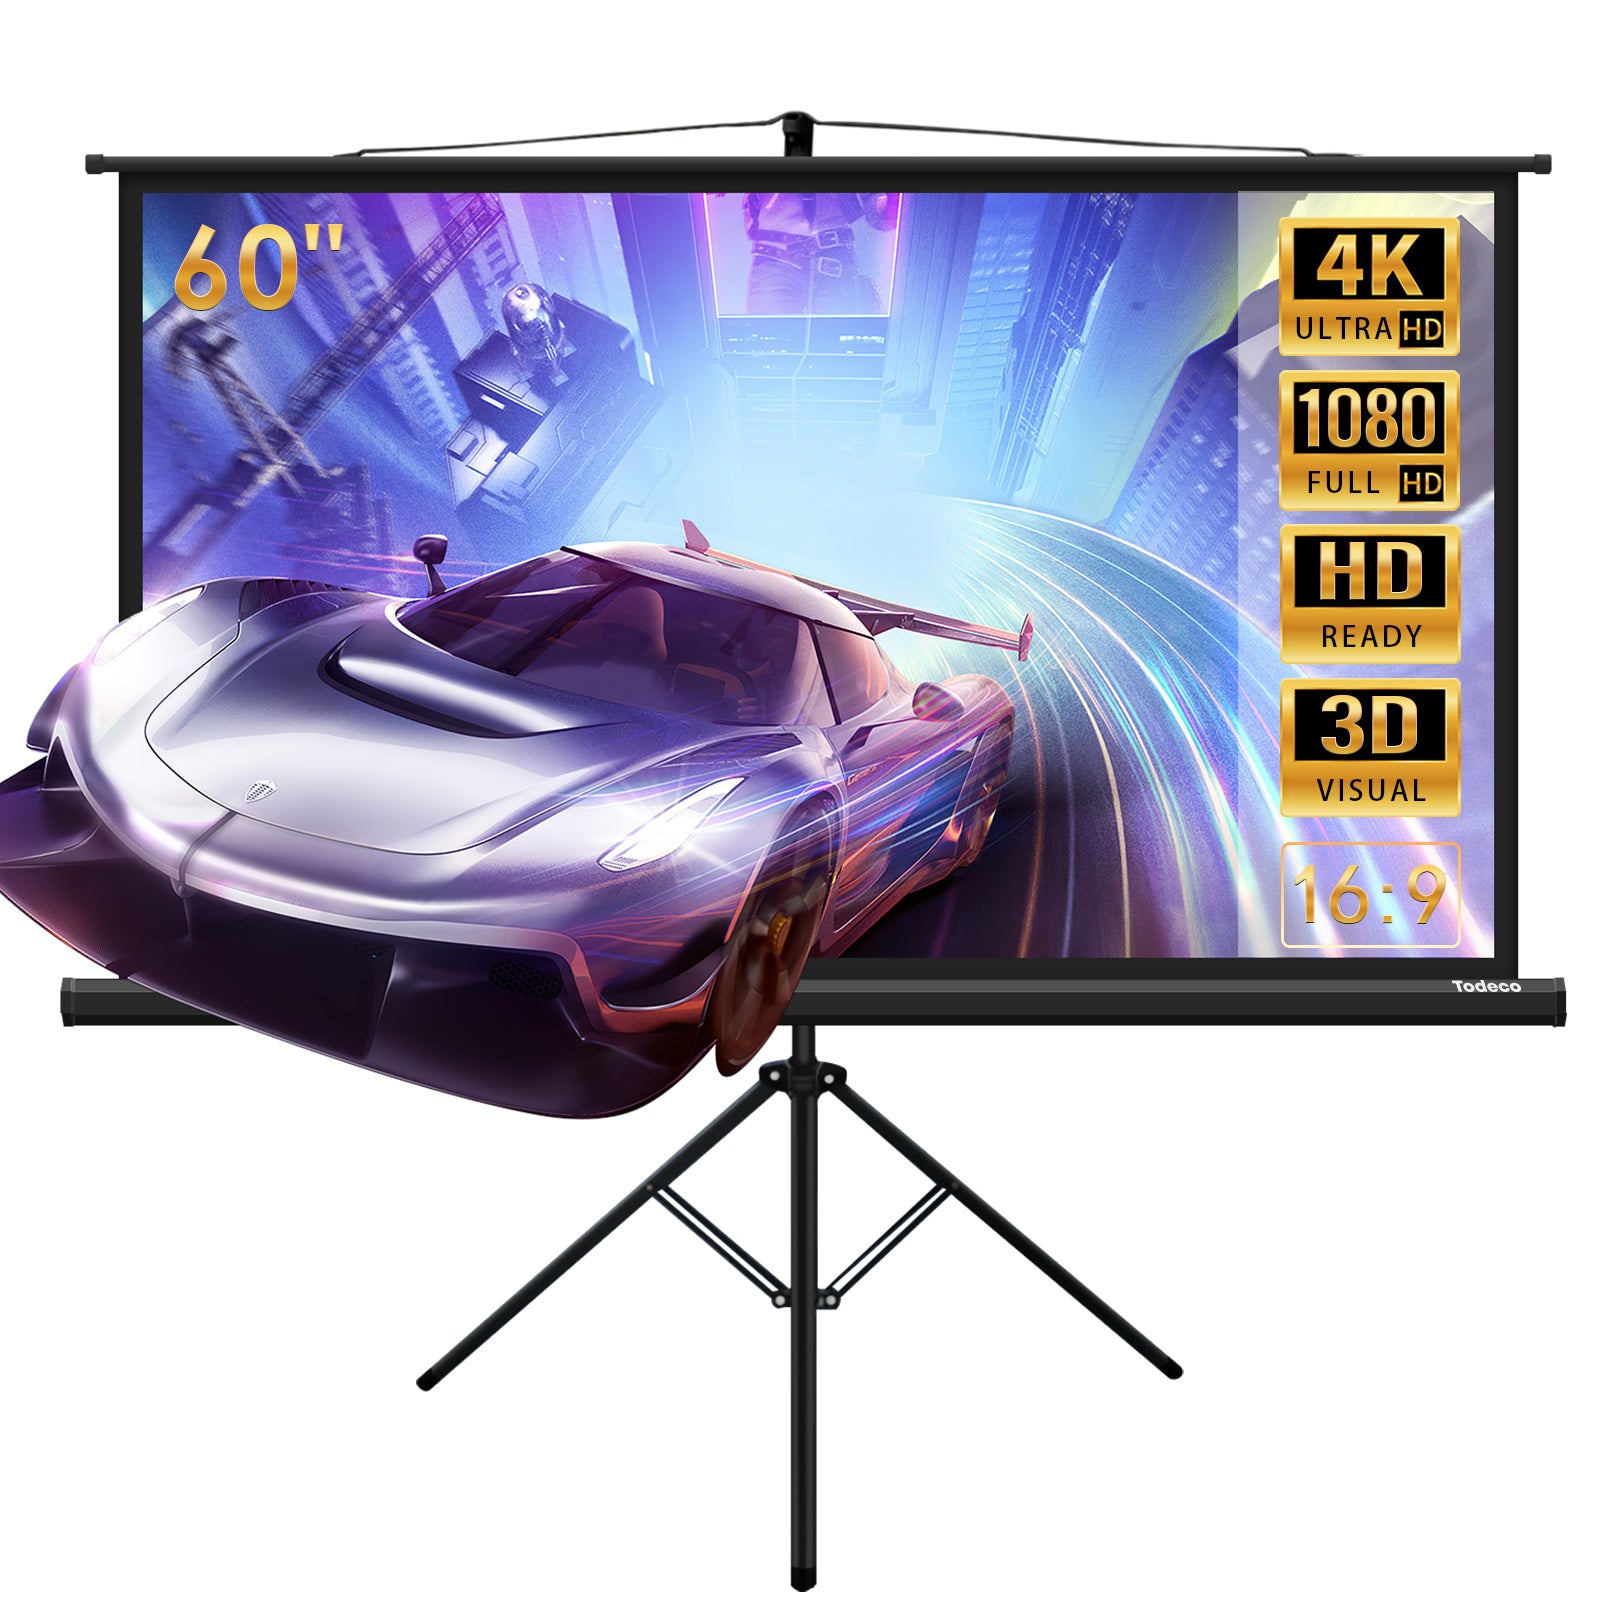 60-Inch-Floor-Standing-Projection-Screen-Foldable-Portable-Projector-Screen-with-Tripod-for-Indoor-or-Outdoor-Use-130-x-75-cm-16-9-Formats-HD-4K-3D-Black-60-Inch-Floor-Standing-Projection-Screen-Black